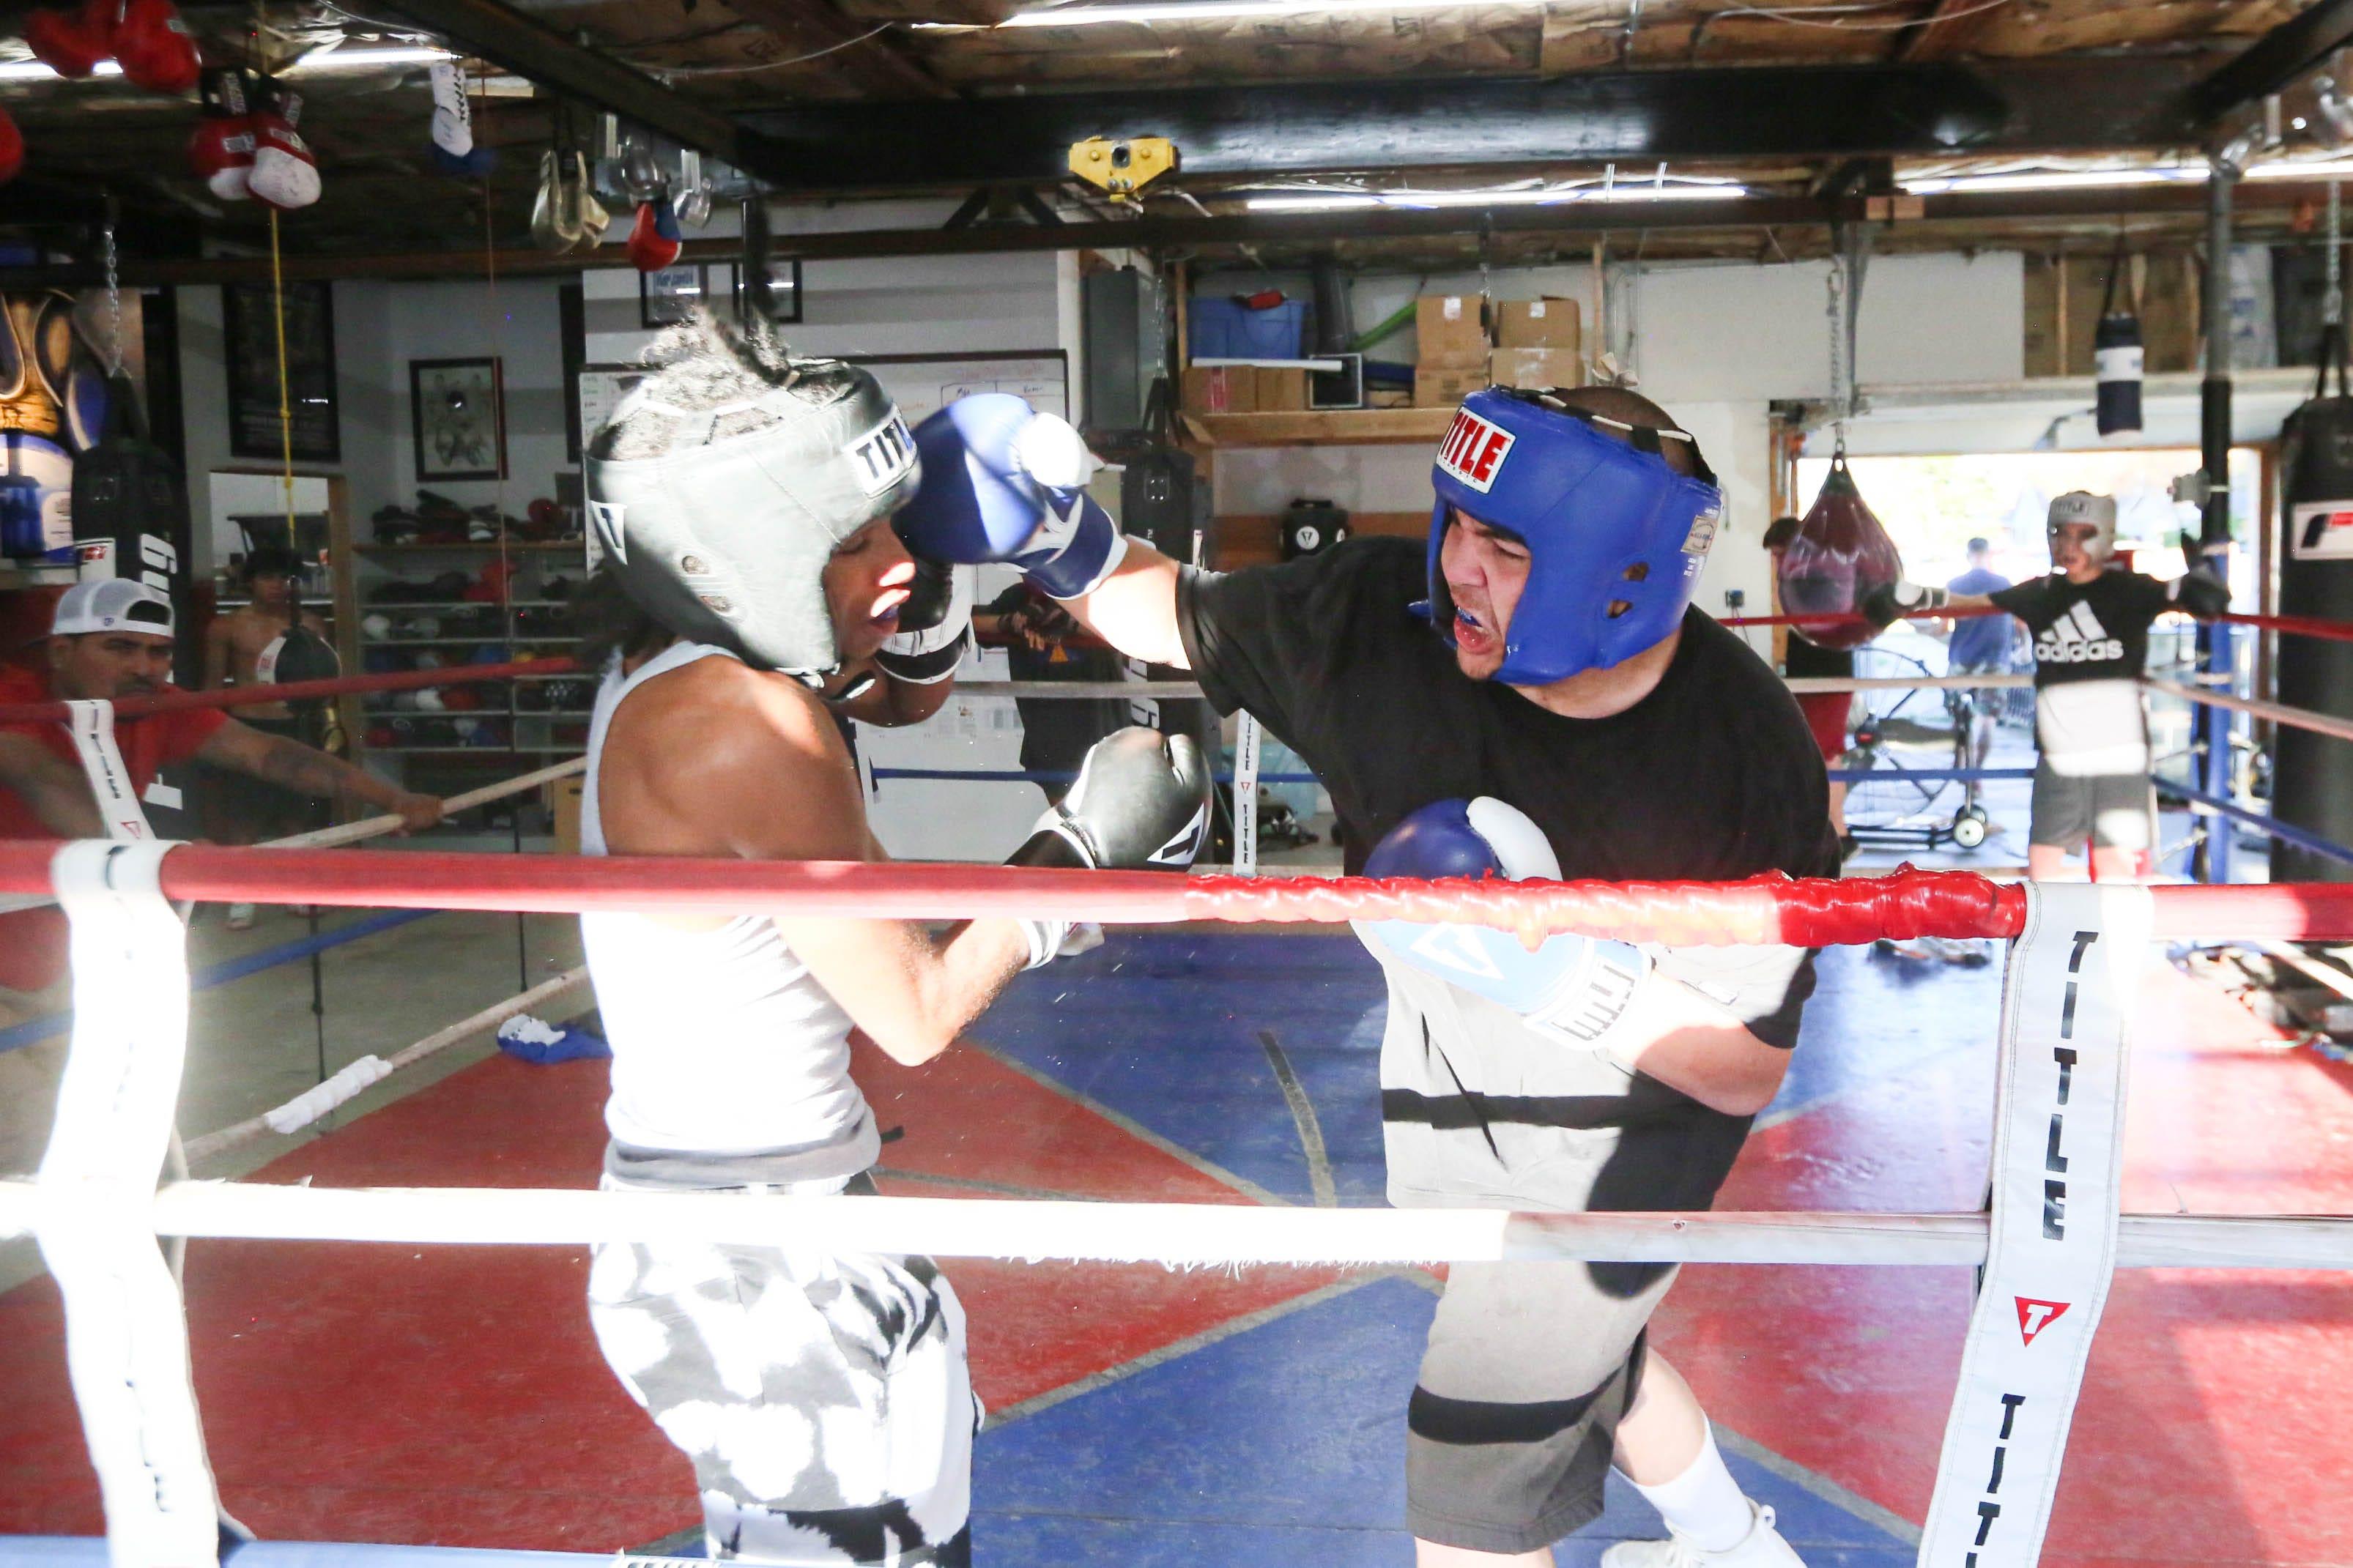 Johnny Lopez, right, boxes during practice at the Reno County Boxing Academy Thursday, Aug. 11, 2022.